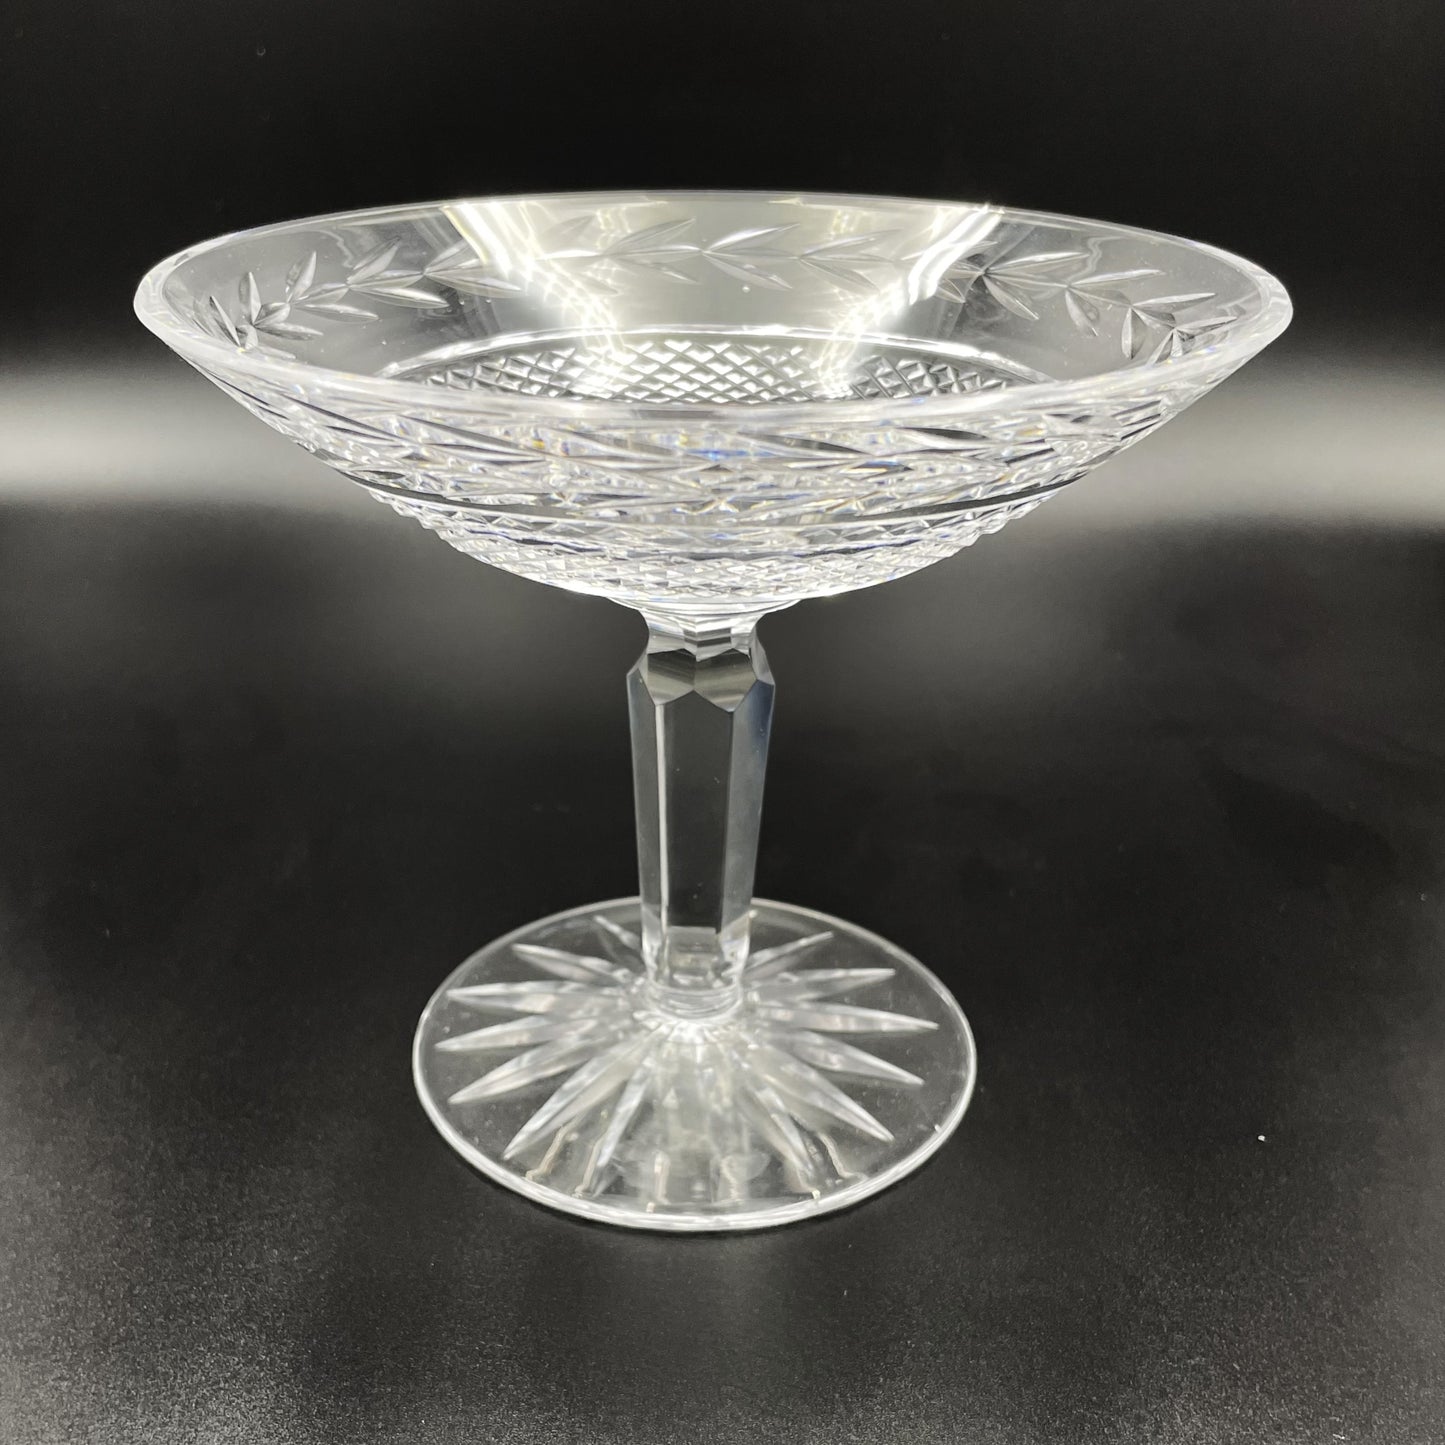 Vintage Waterford Crystal Glandore Cut Compote Pedestal Candy Dish - 14cm